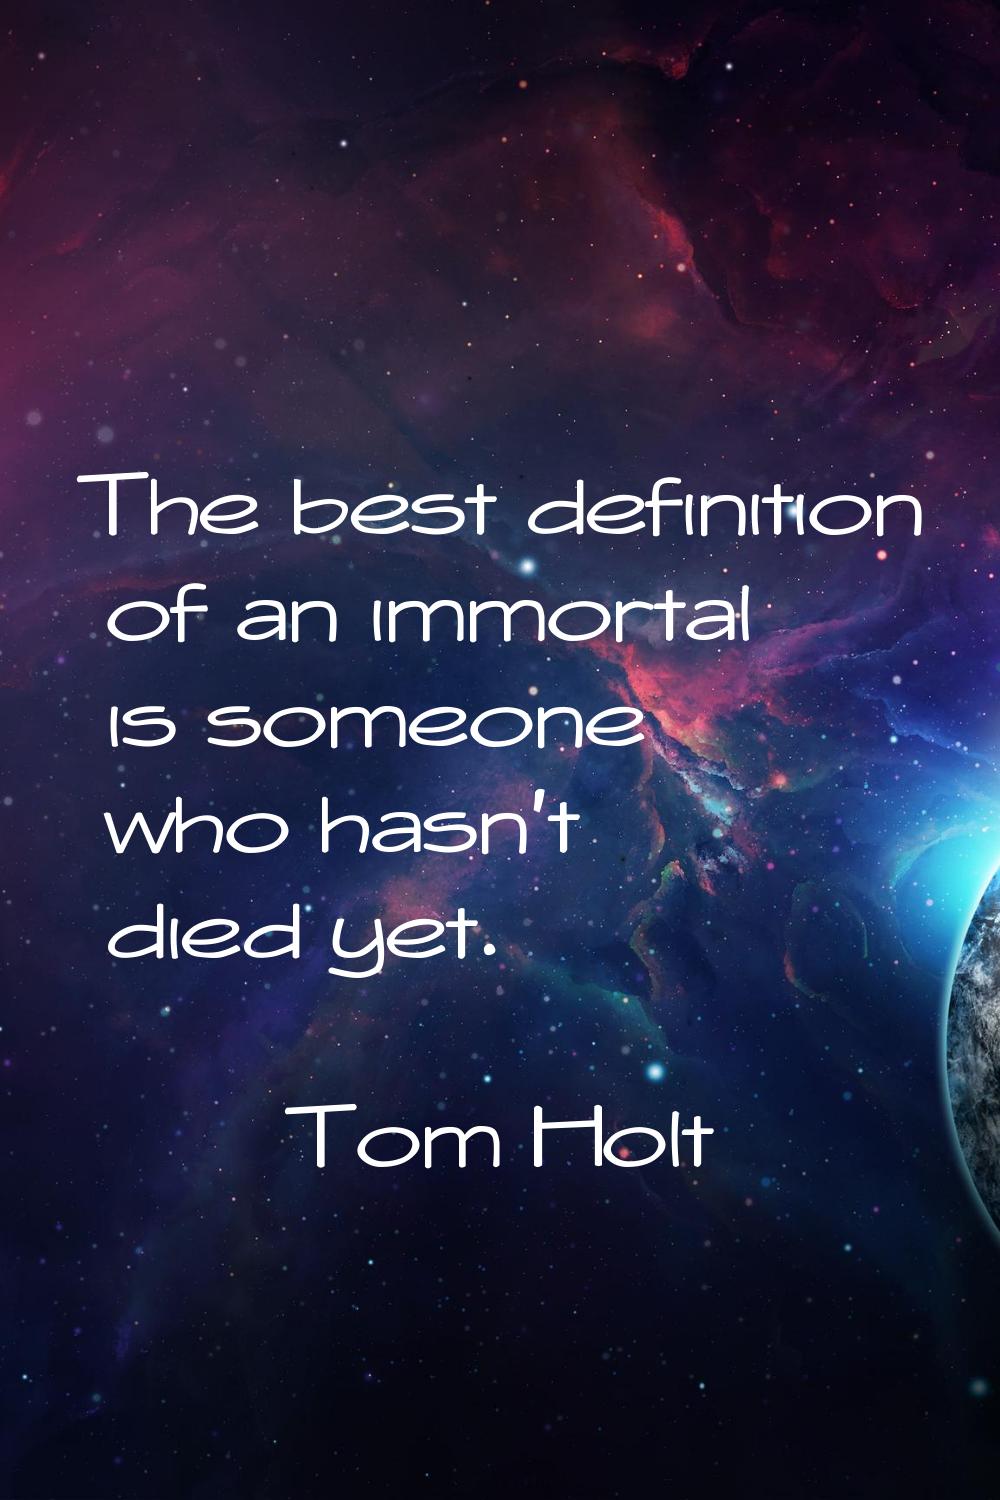 The best definition of an immortal is someone who hasn't died yet.